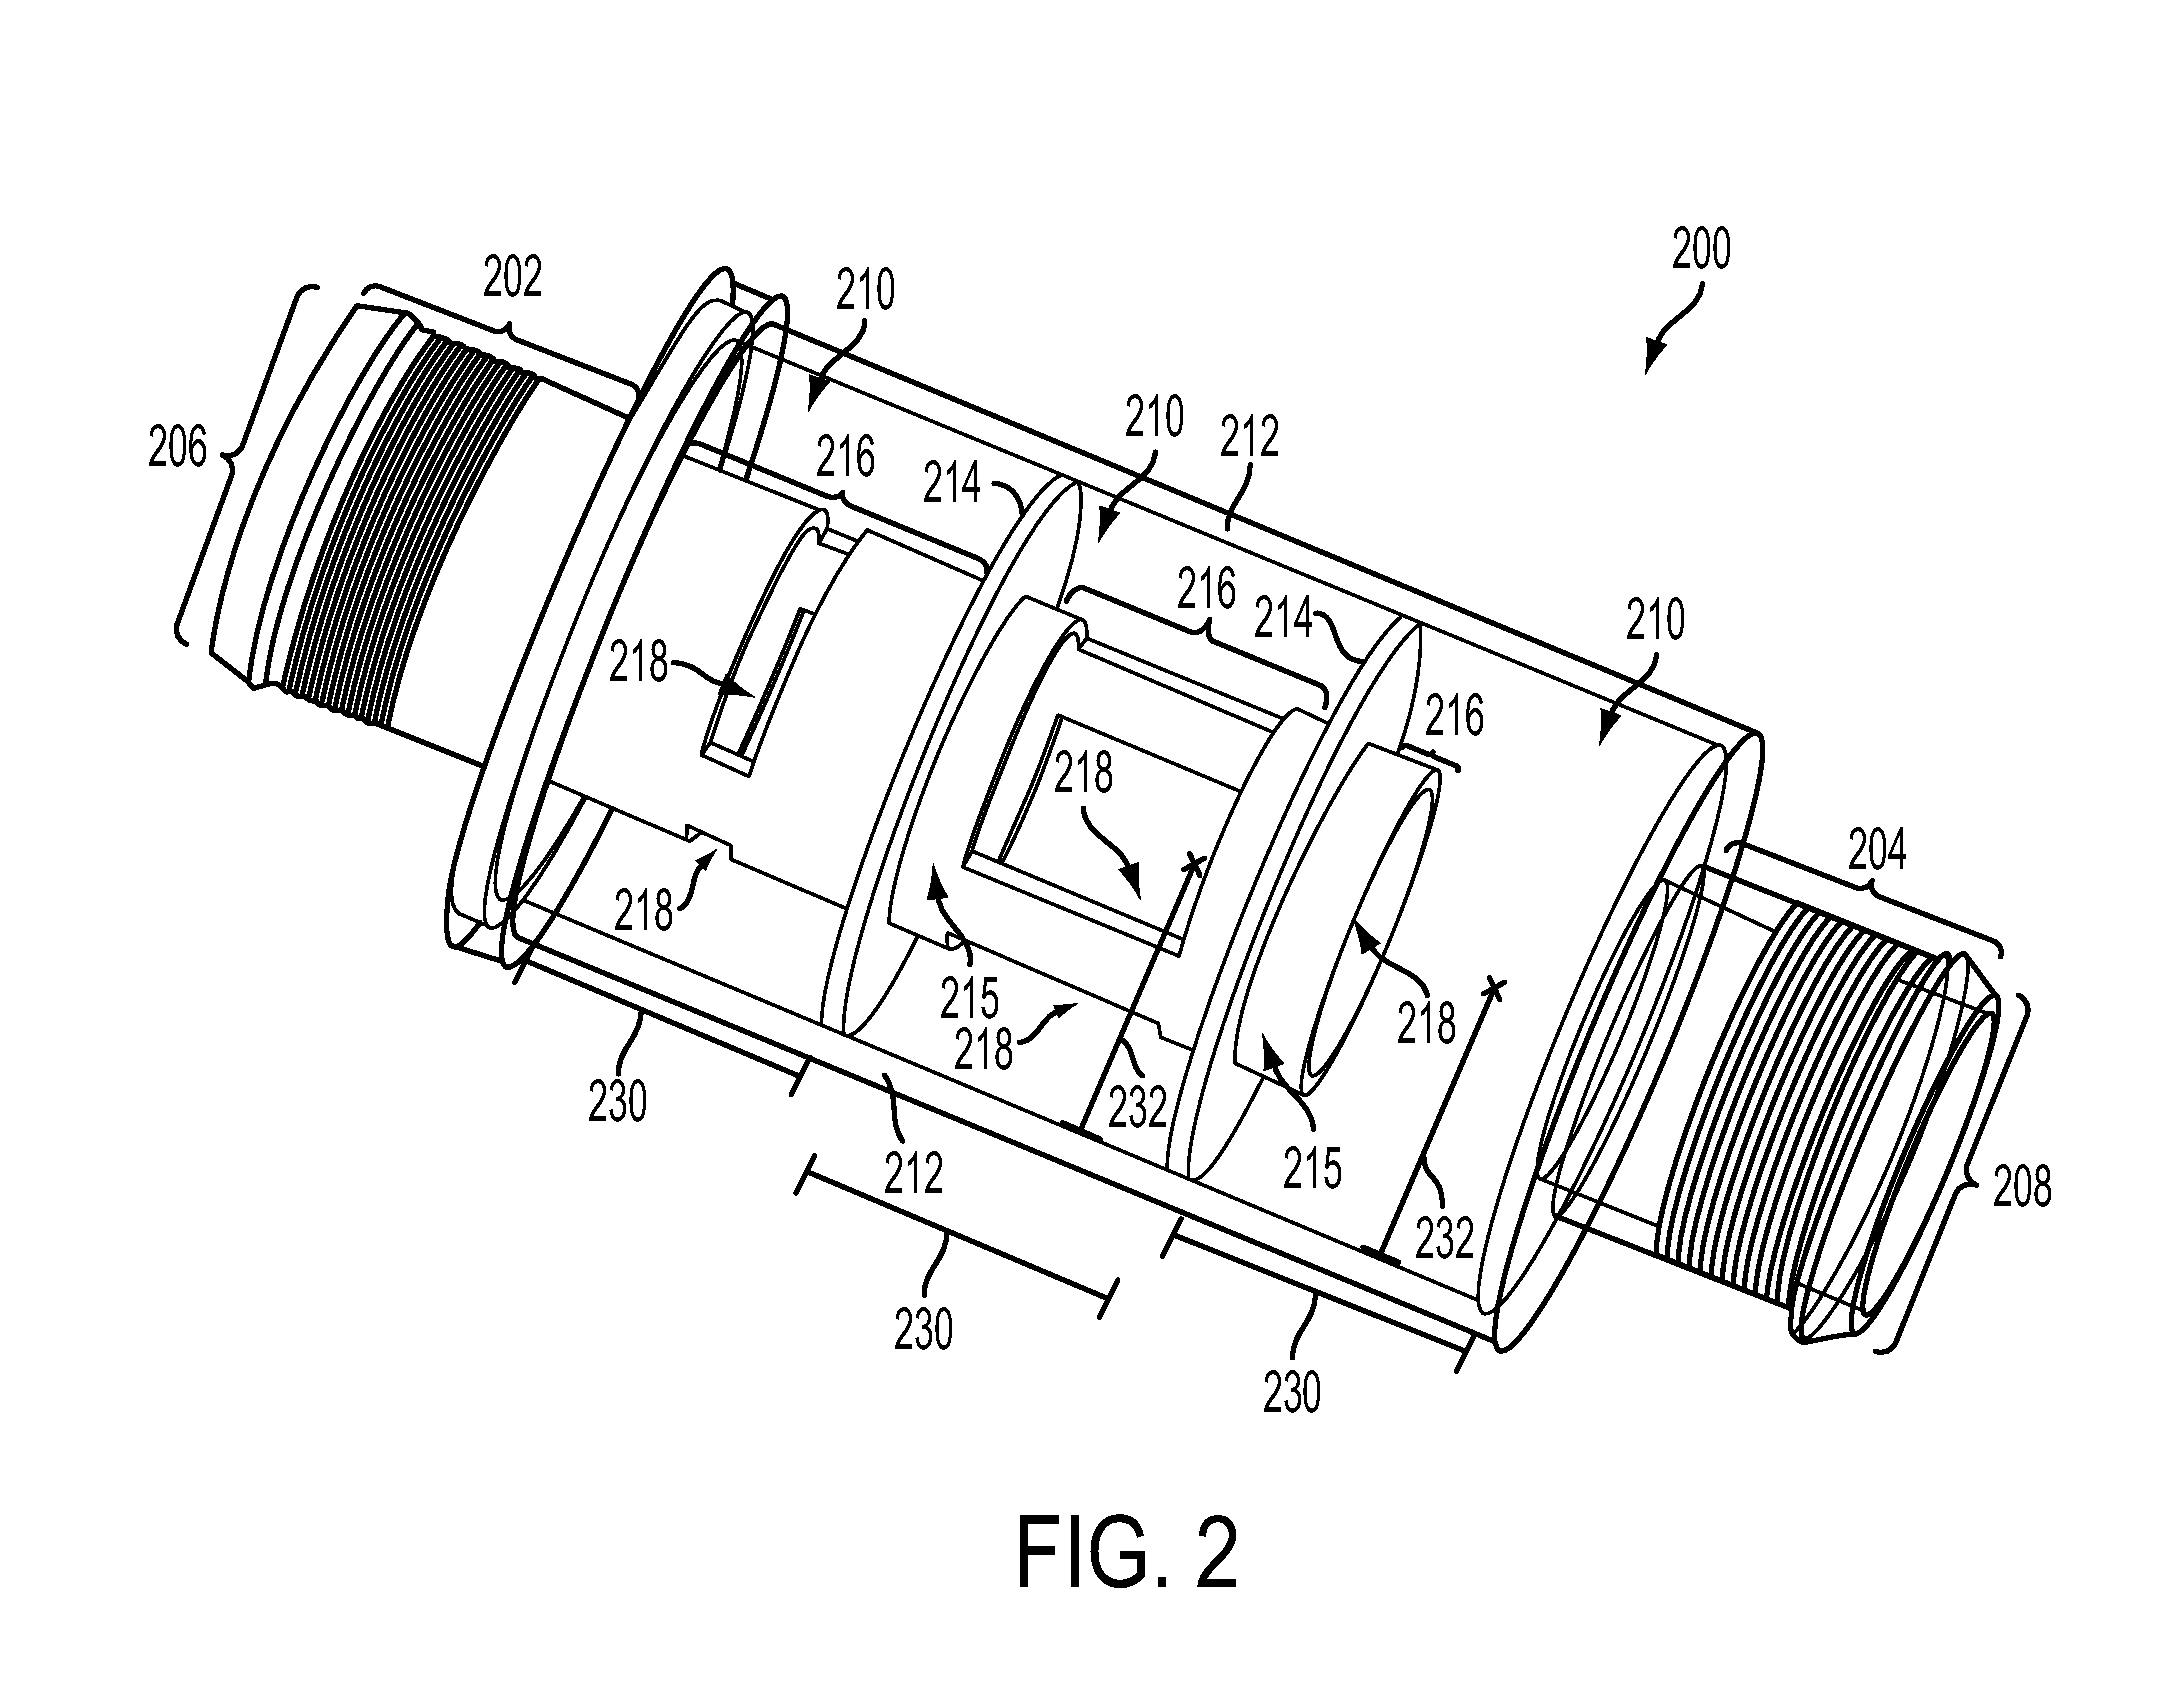 Intake system having a silencer device